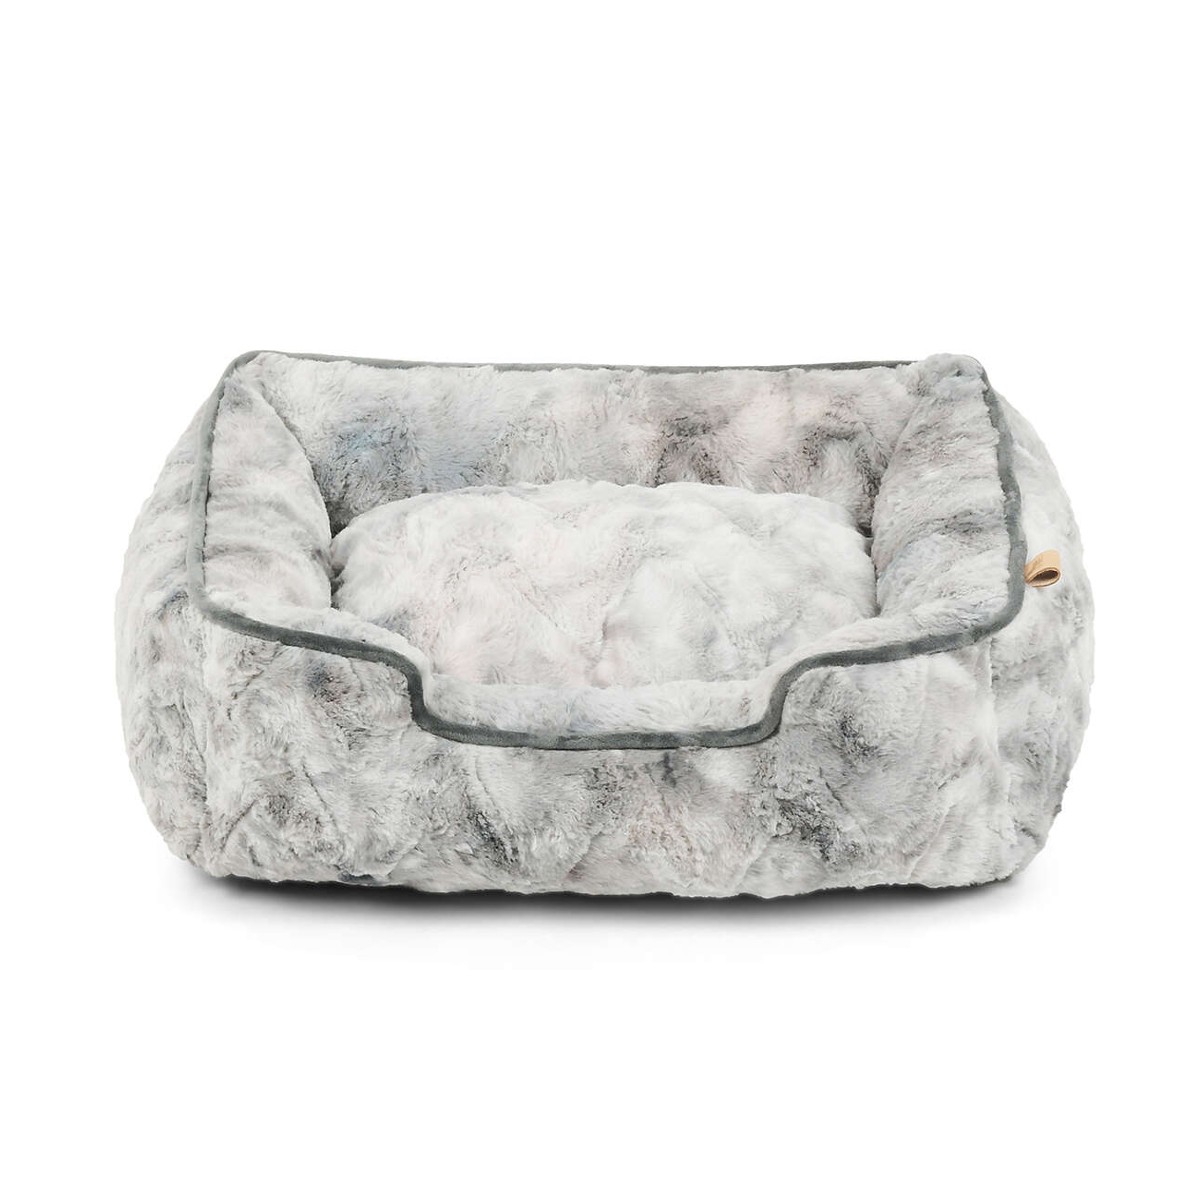 P.L.A.Y. Dreamland Lounge Dog Bed - Frost Gray